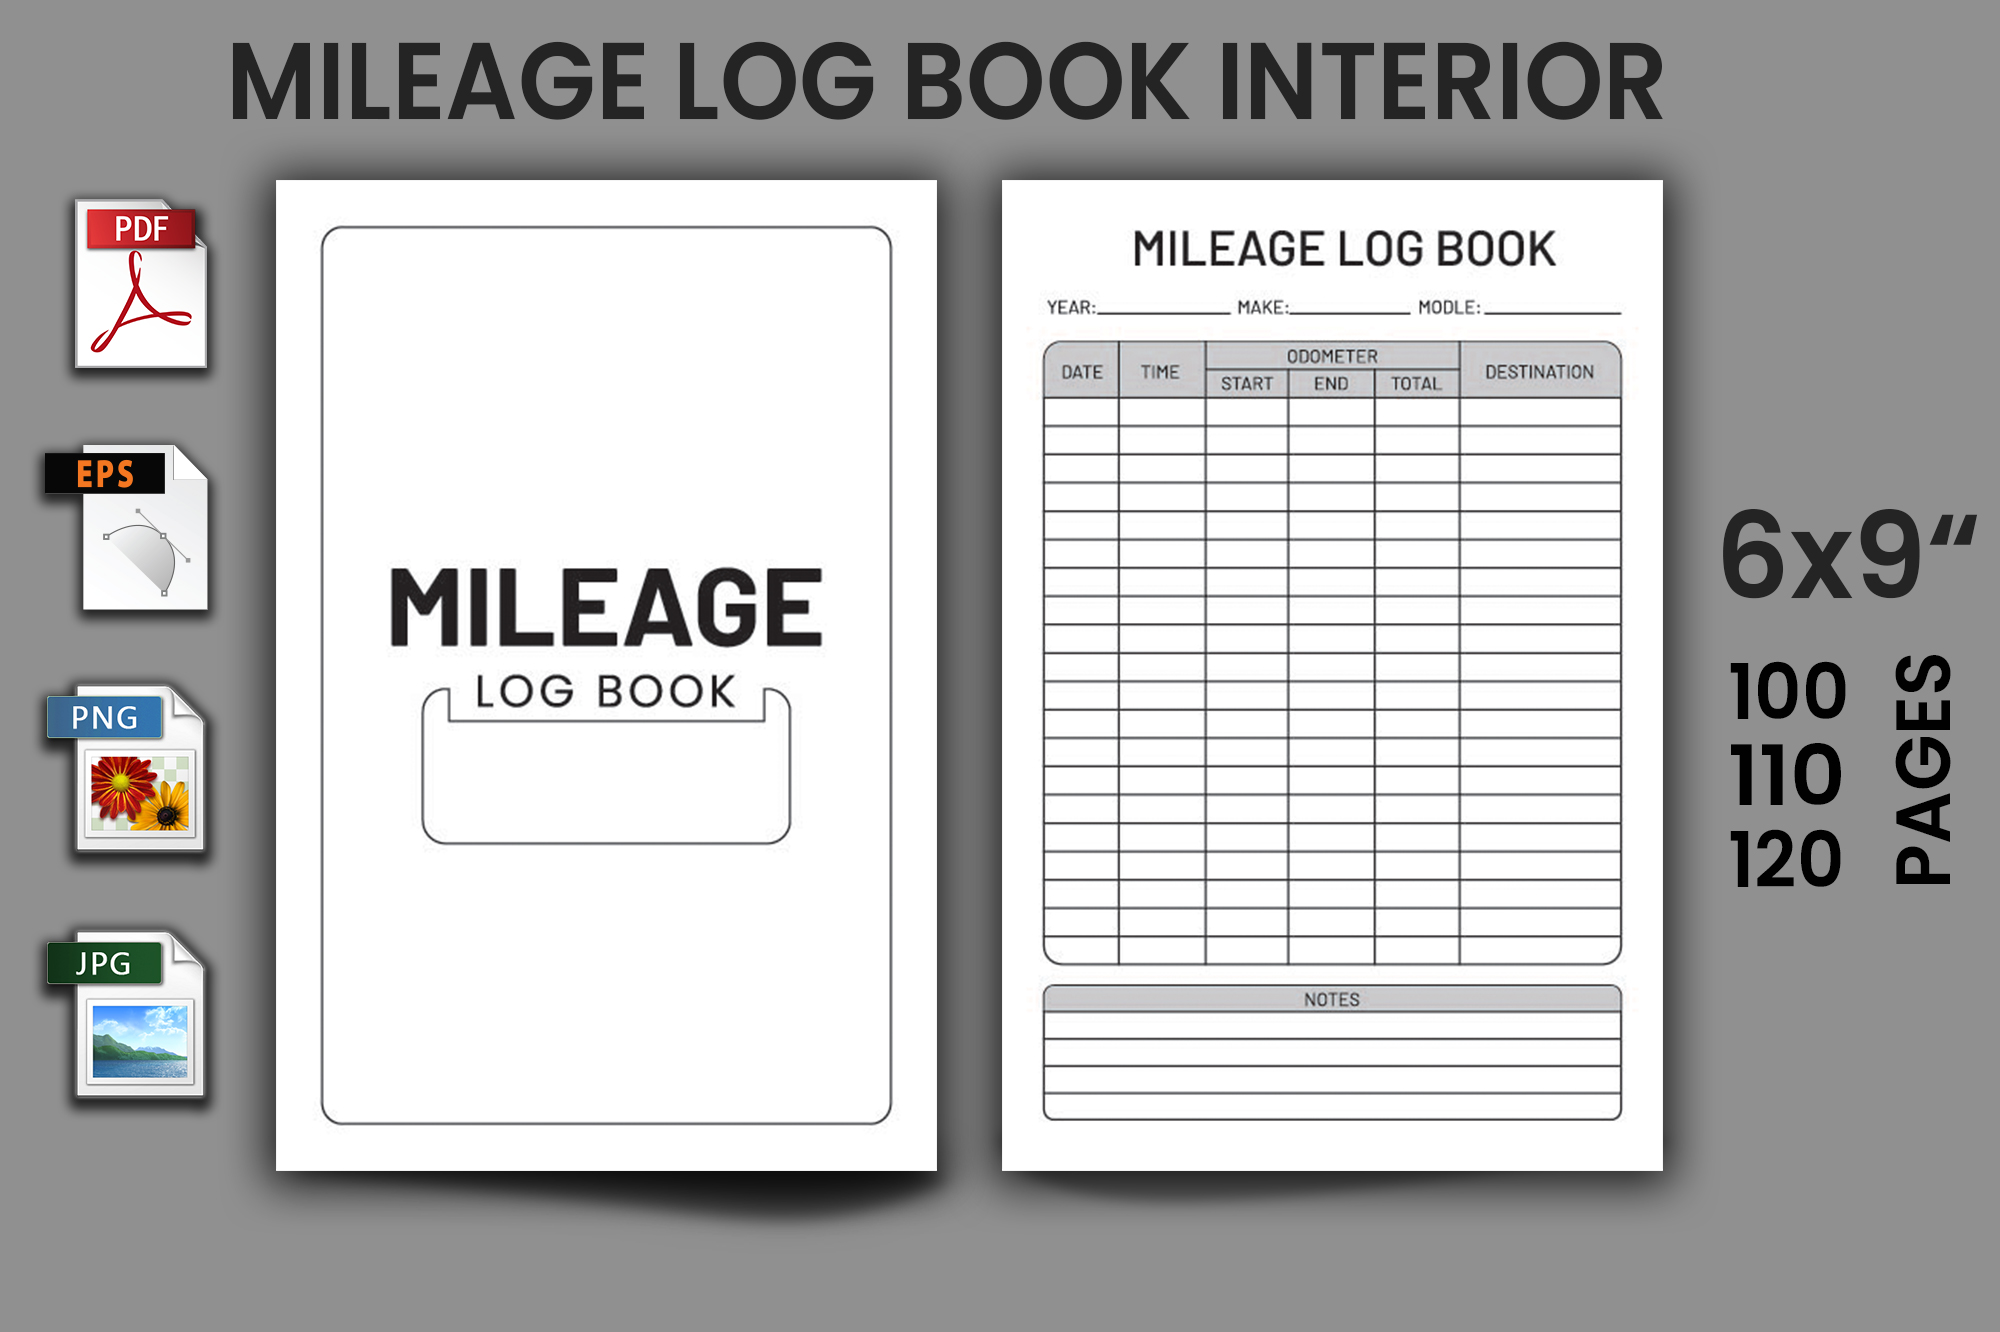 Mileage log book with a picture of the mileage log.